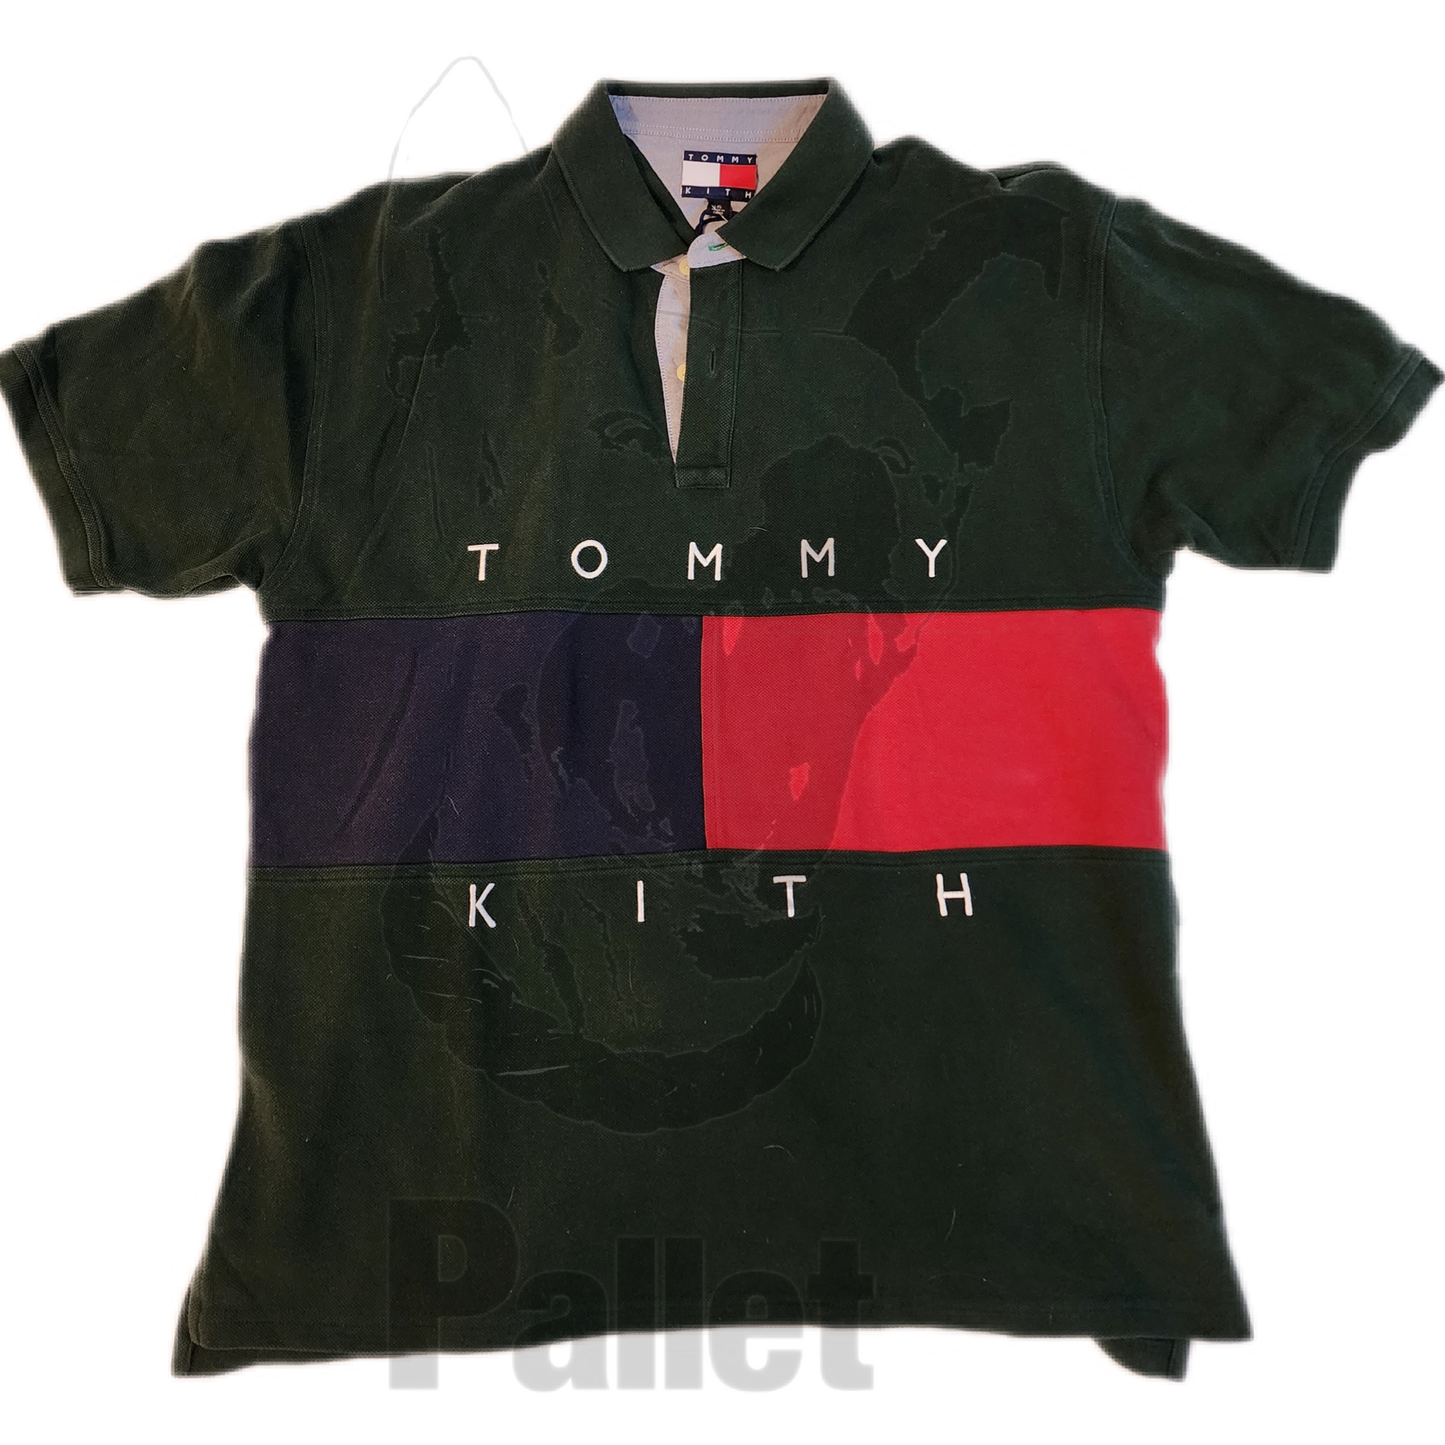 Kith - " Tommy Hilfiger Polo" - Size Large